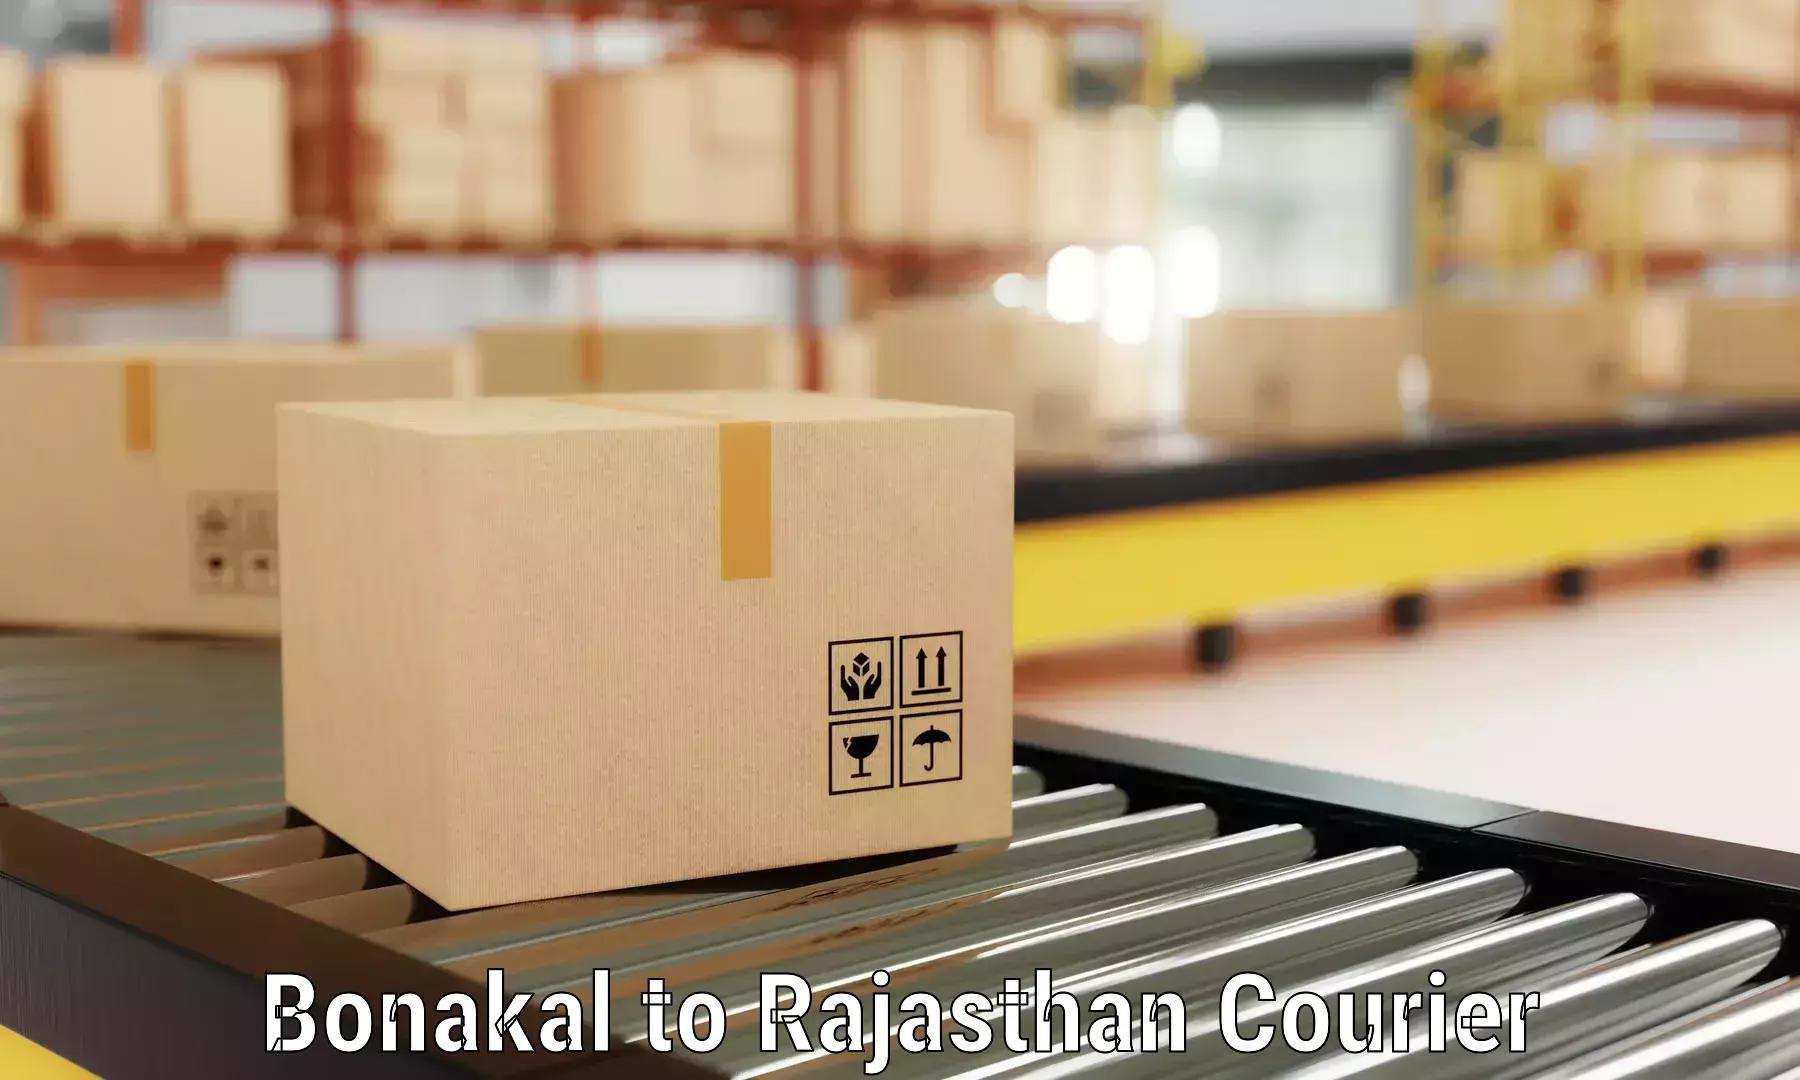 Reliable goods transport in Bonakal to Rajasthan